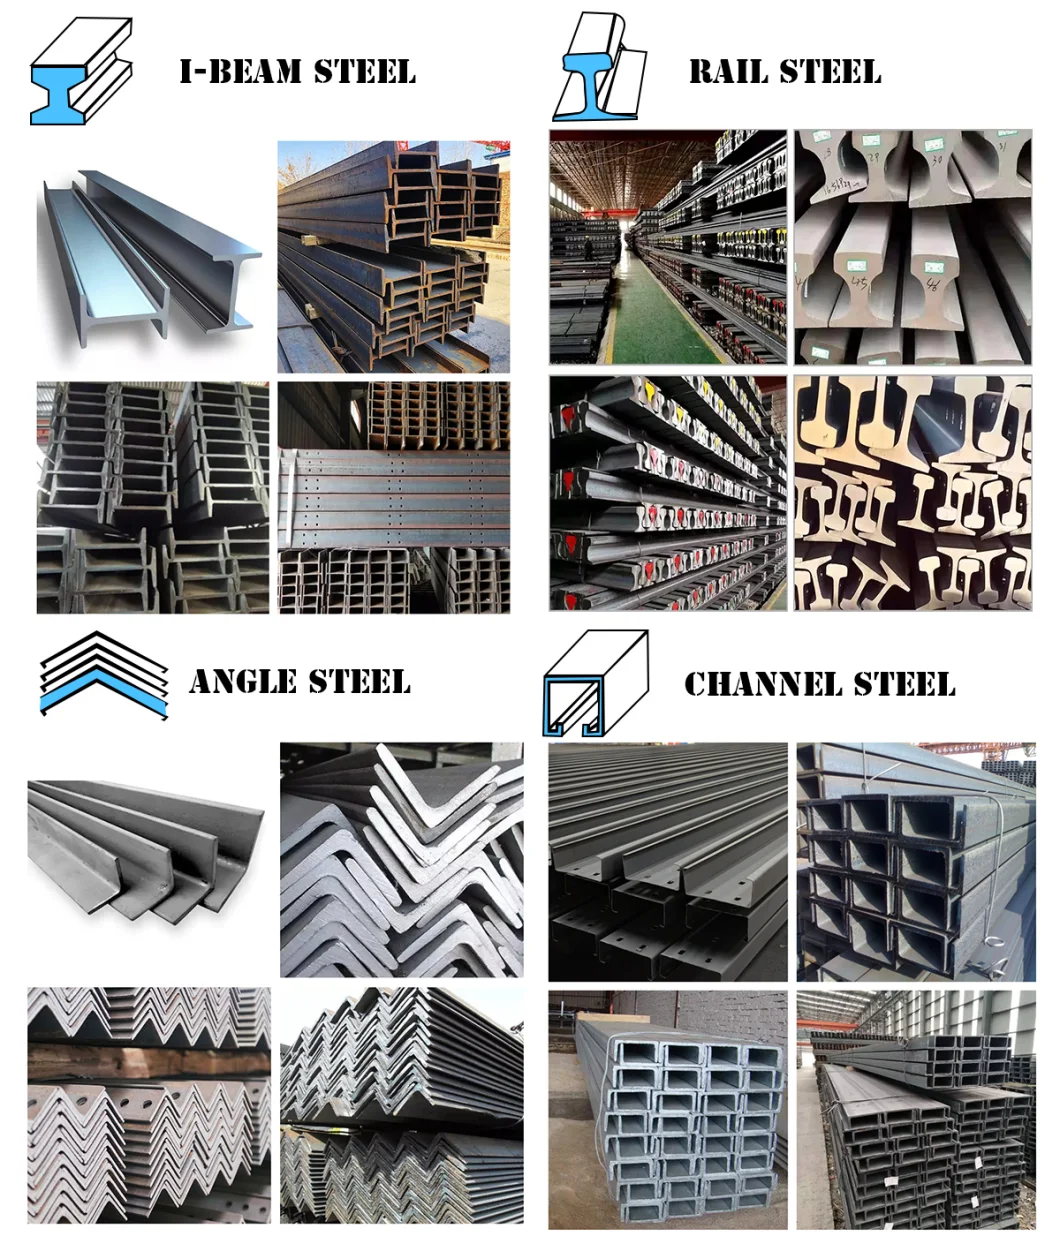 Hot Rolled Grooved Rail and Special Steel Crane Rail Sections for Railway Material